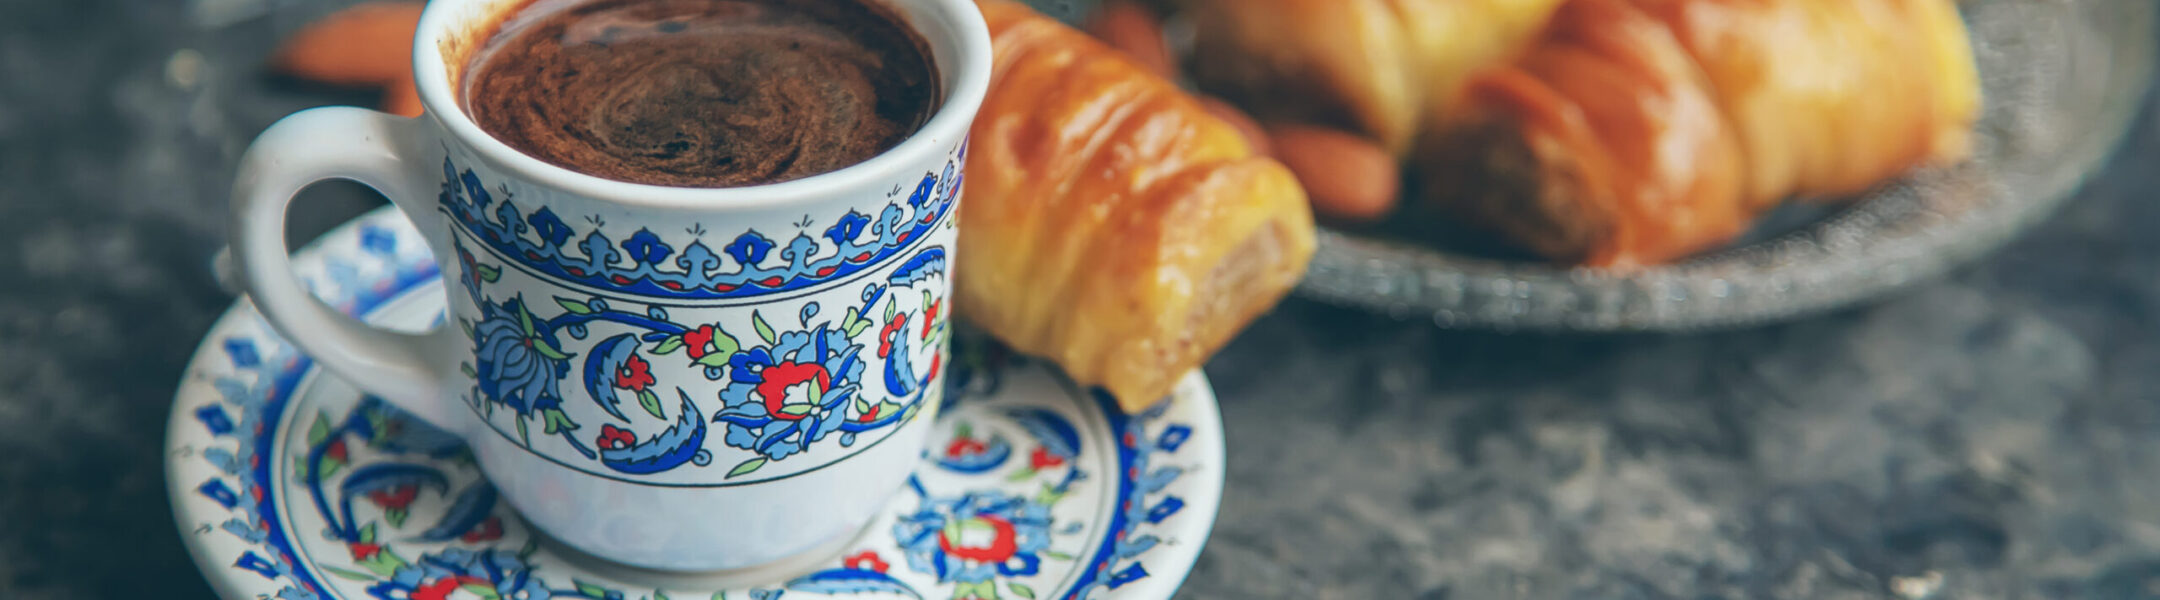 A cup of Turkish coffee and baklava. Selective focus.